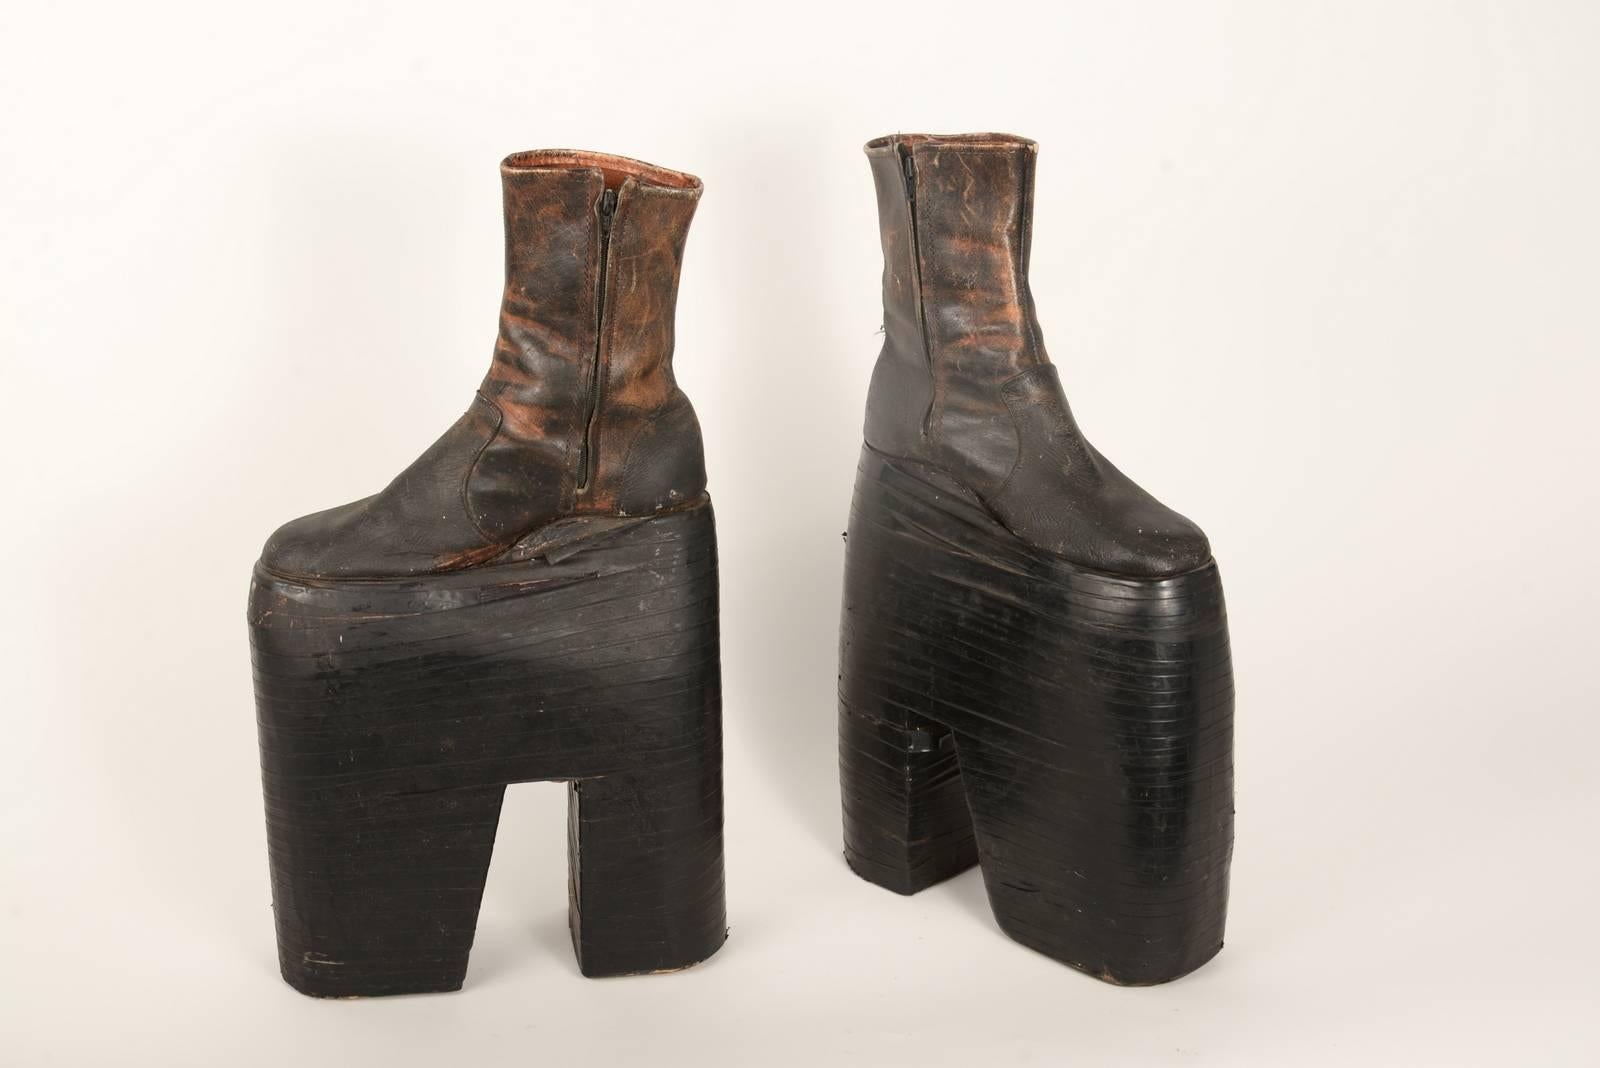 Modified 1960s leather zip up ankle boots. The bases are carved out of wood and wrapped in electrical tape.